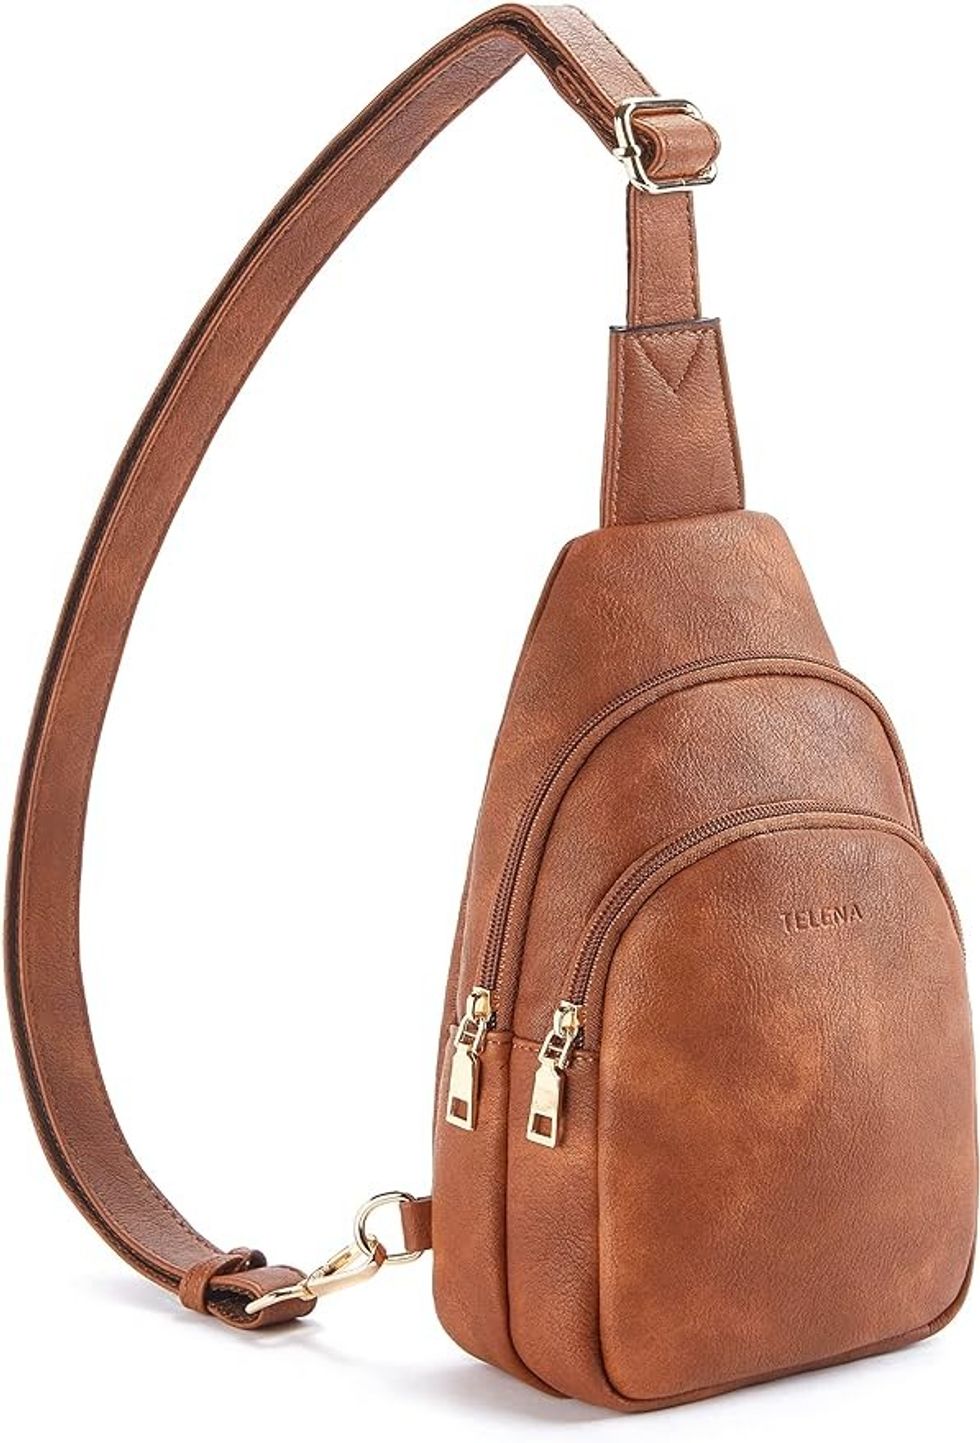 Telena Small Leather Sling Bag